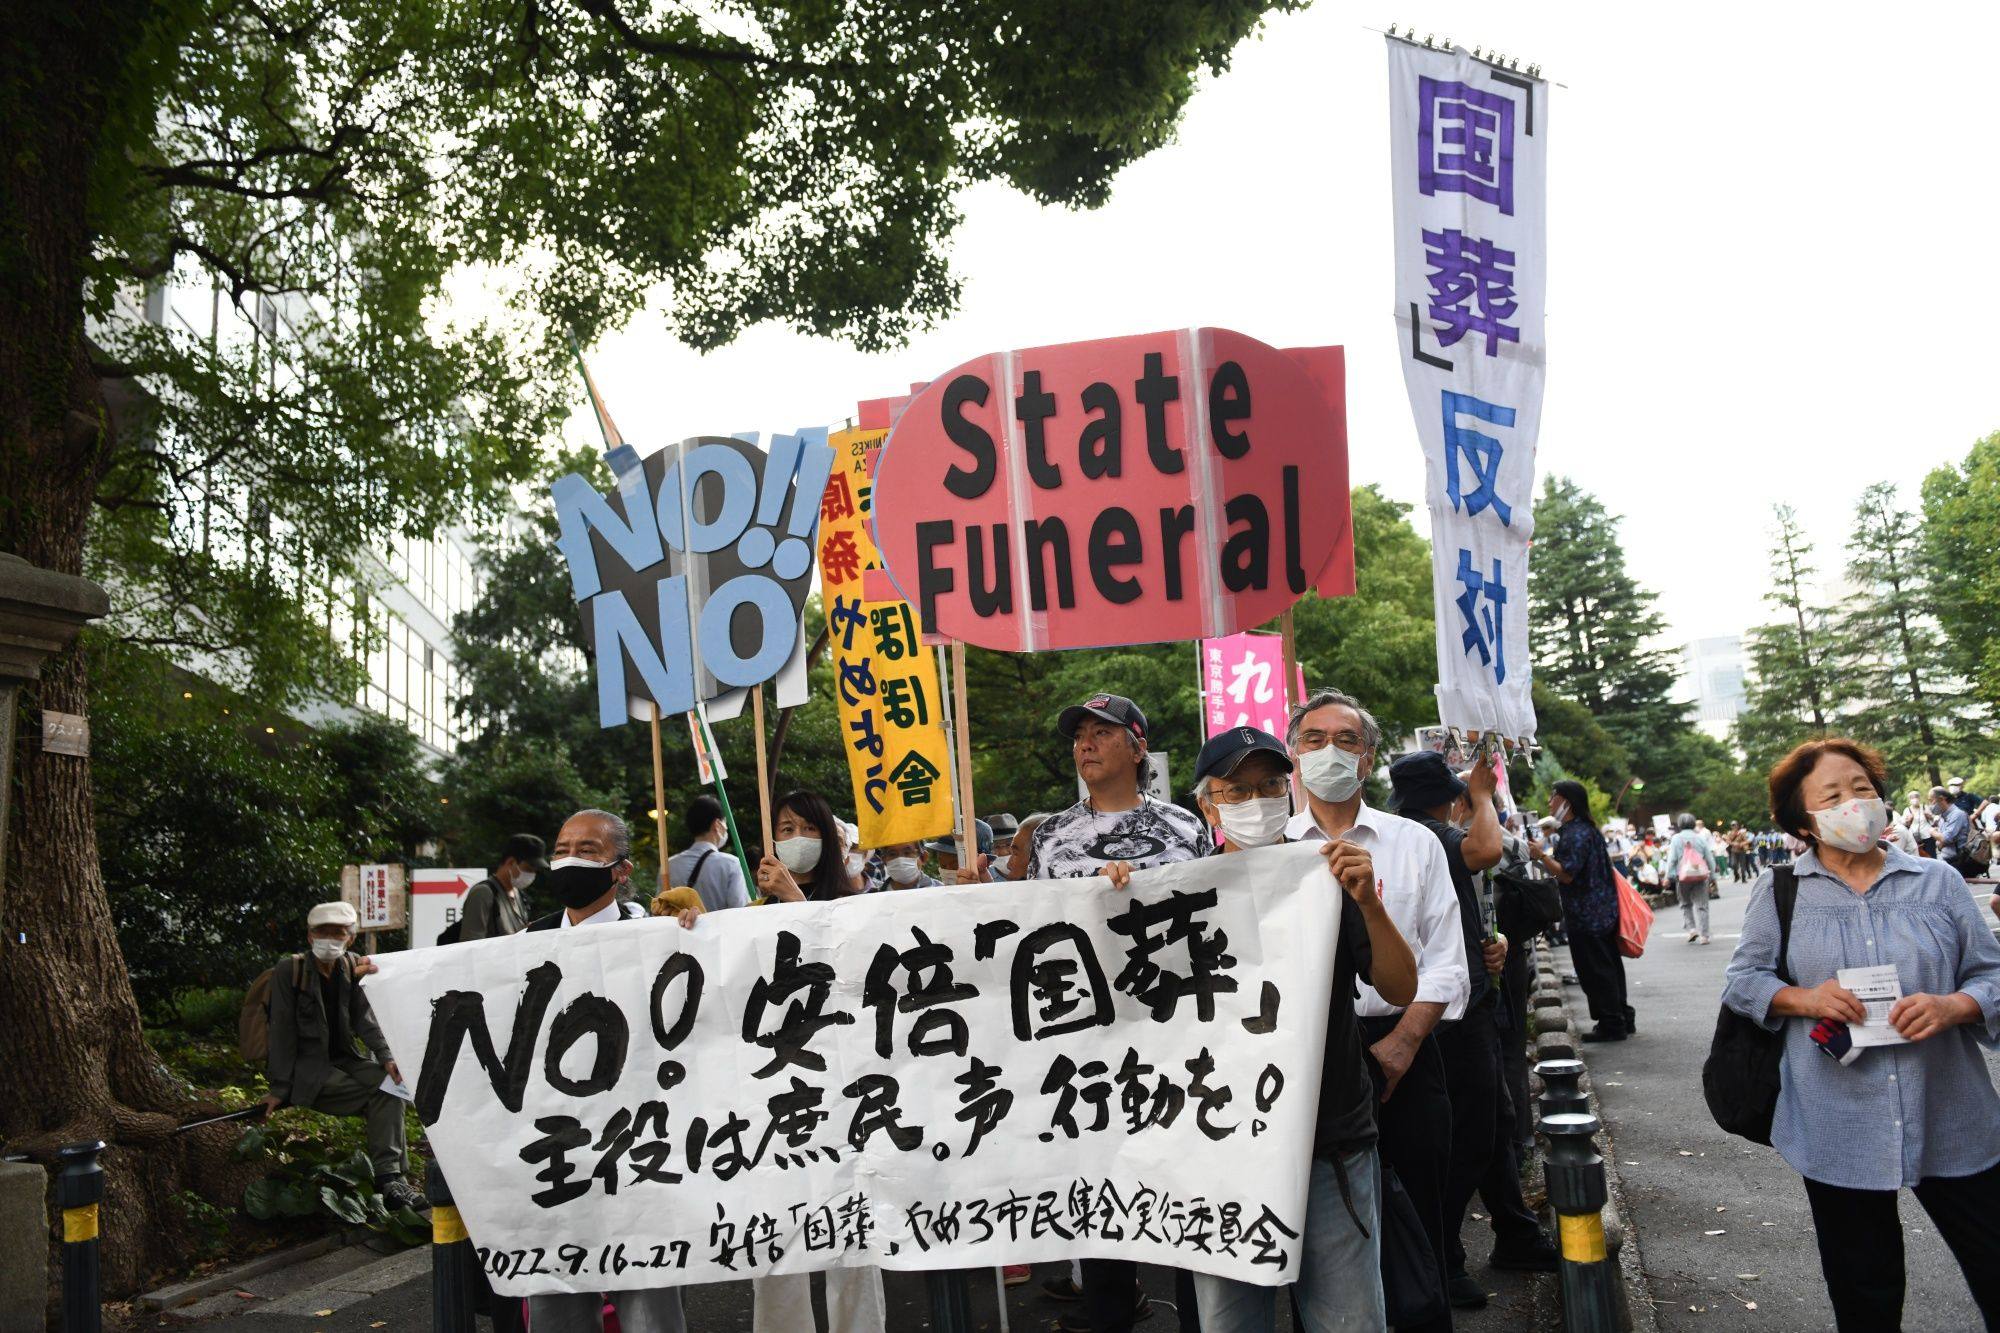 Demonstrators hold placards during a protest against the planned state funeral for slain former Japanese prime minister Shinzo Abe in Tokyo last week. Photo: Bloomberg